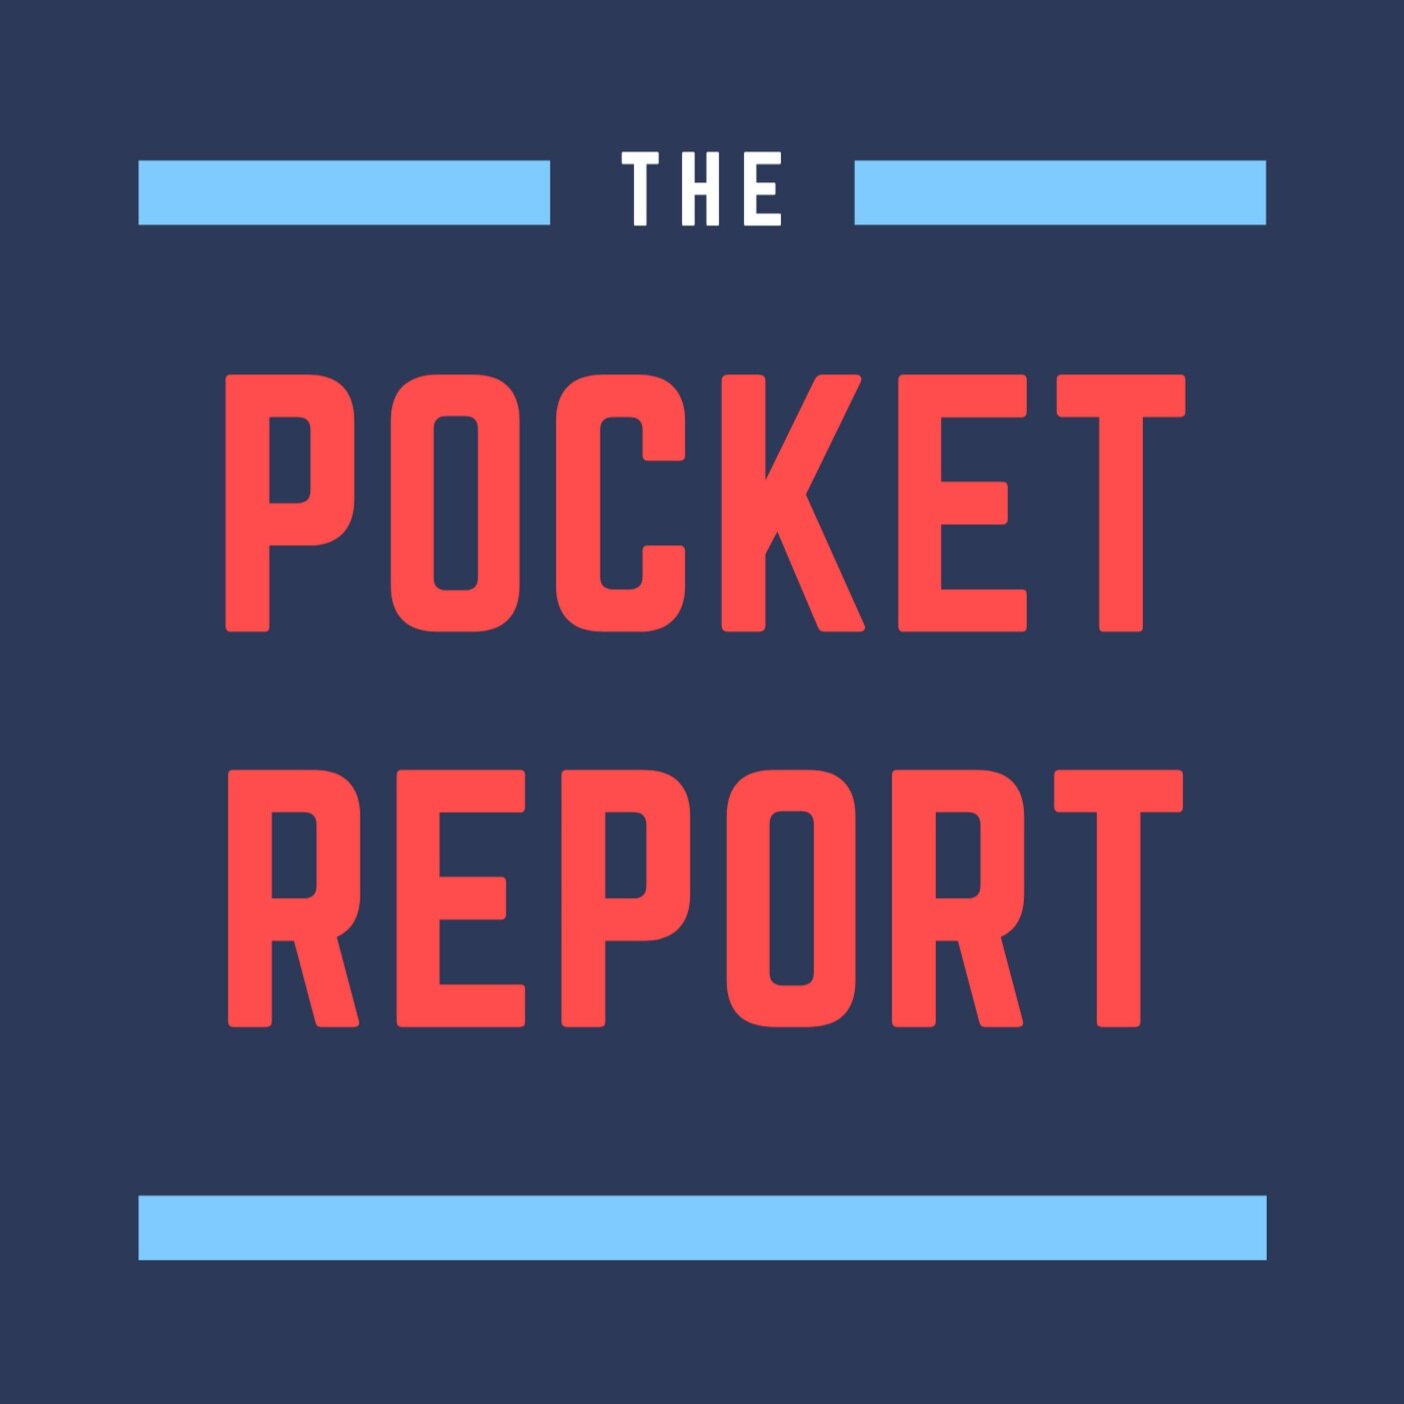 The Pocket Report